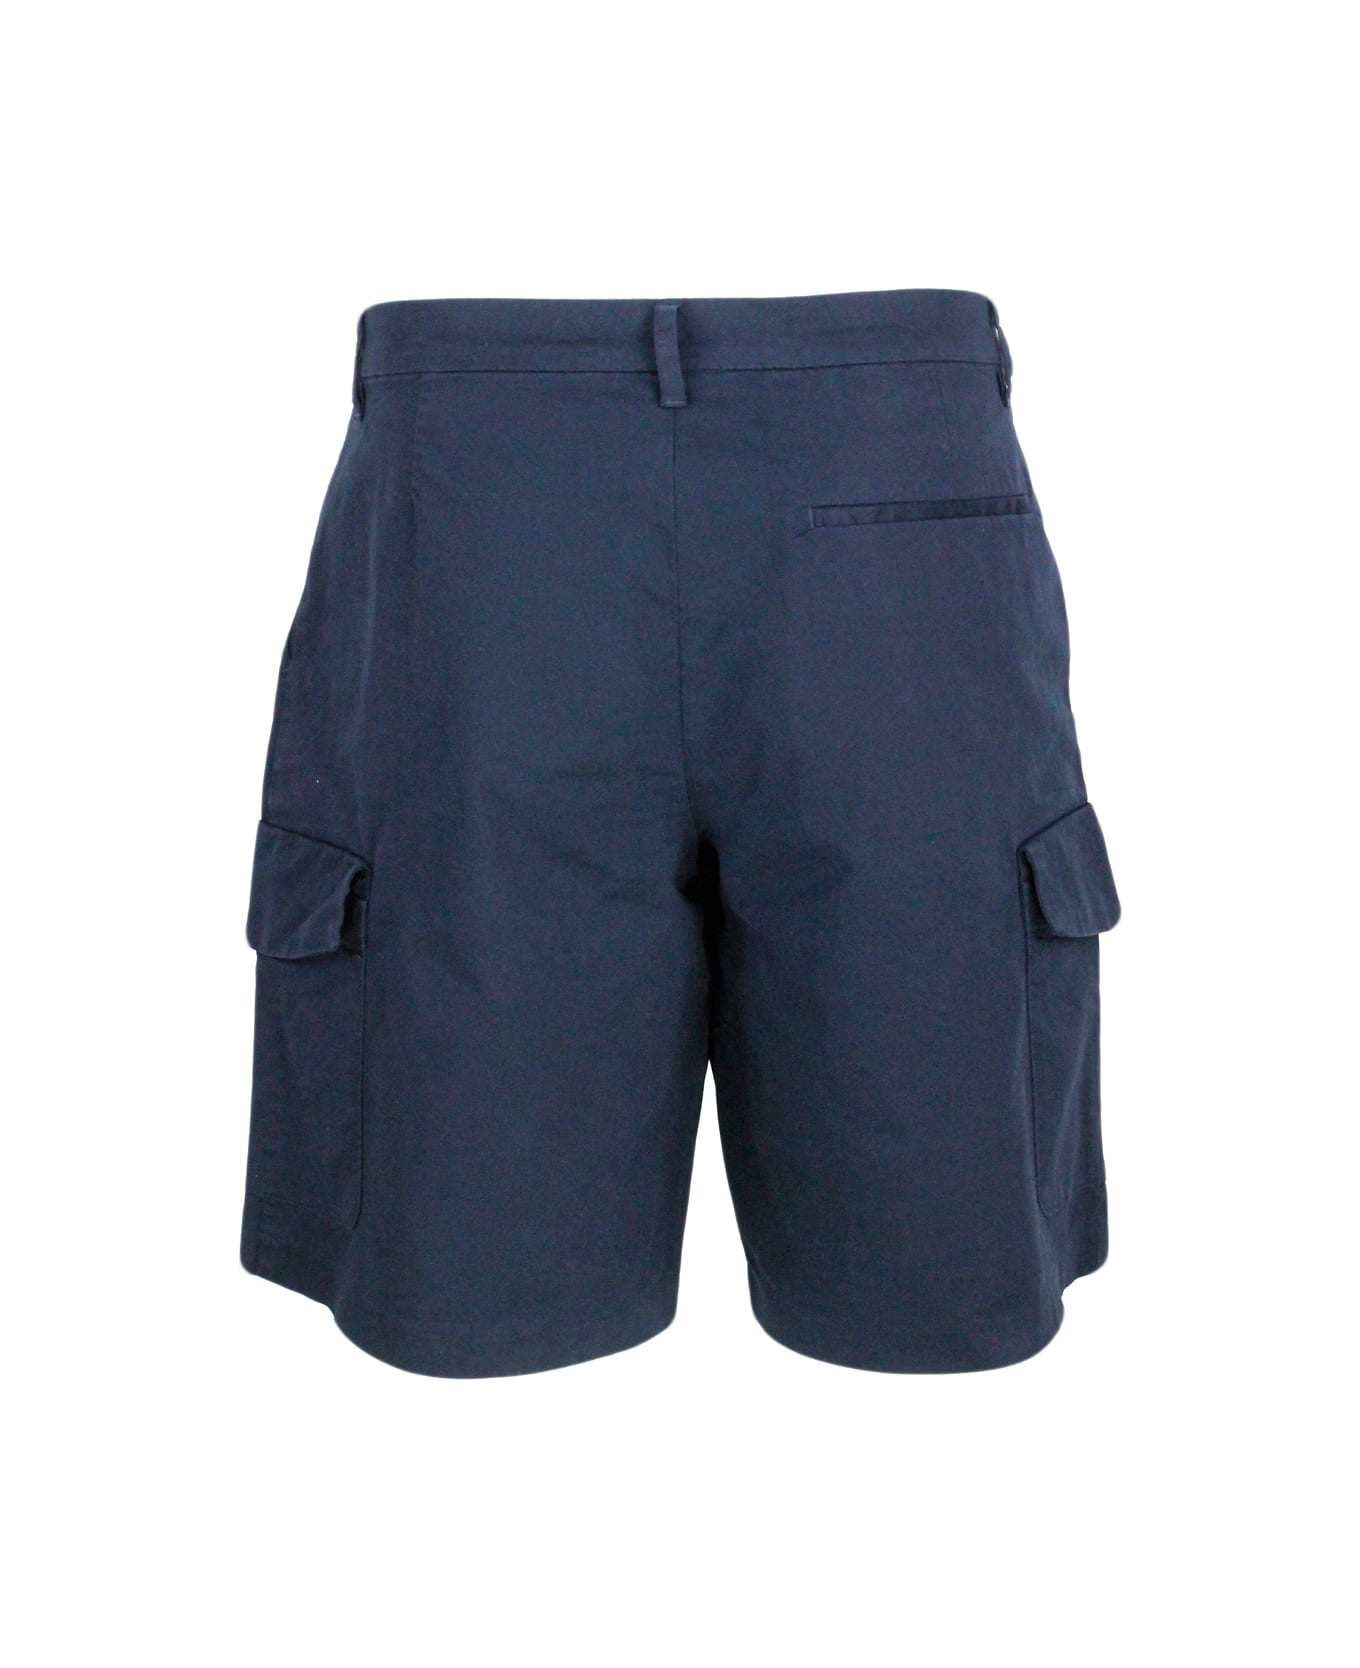 Armani Collezioni Stretch Cotton Bermuda Shorts, Cargo Model With Large Pockets On The Leg And Zip And Button Closure - Blu